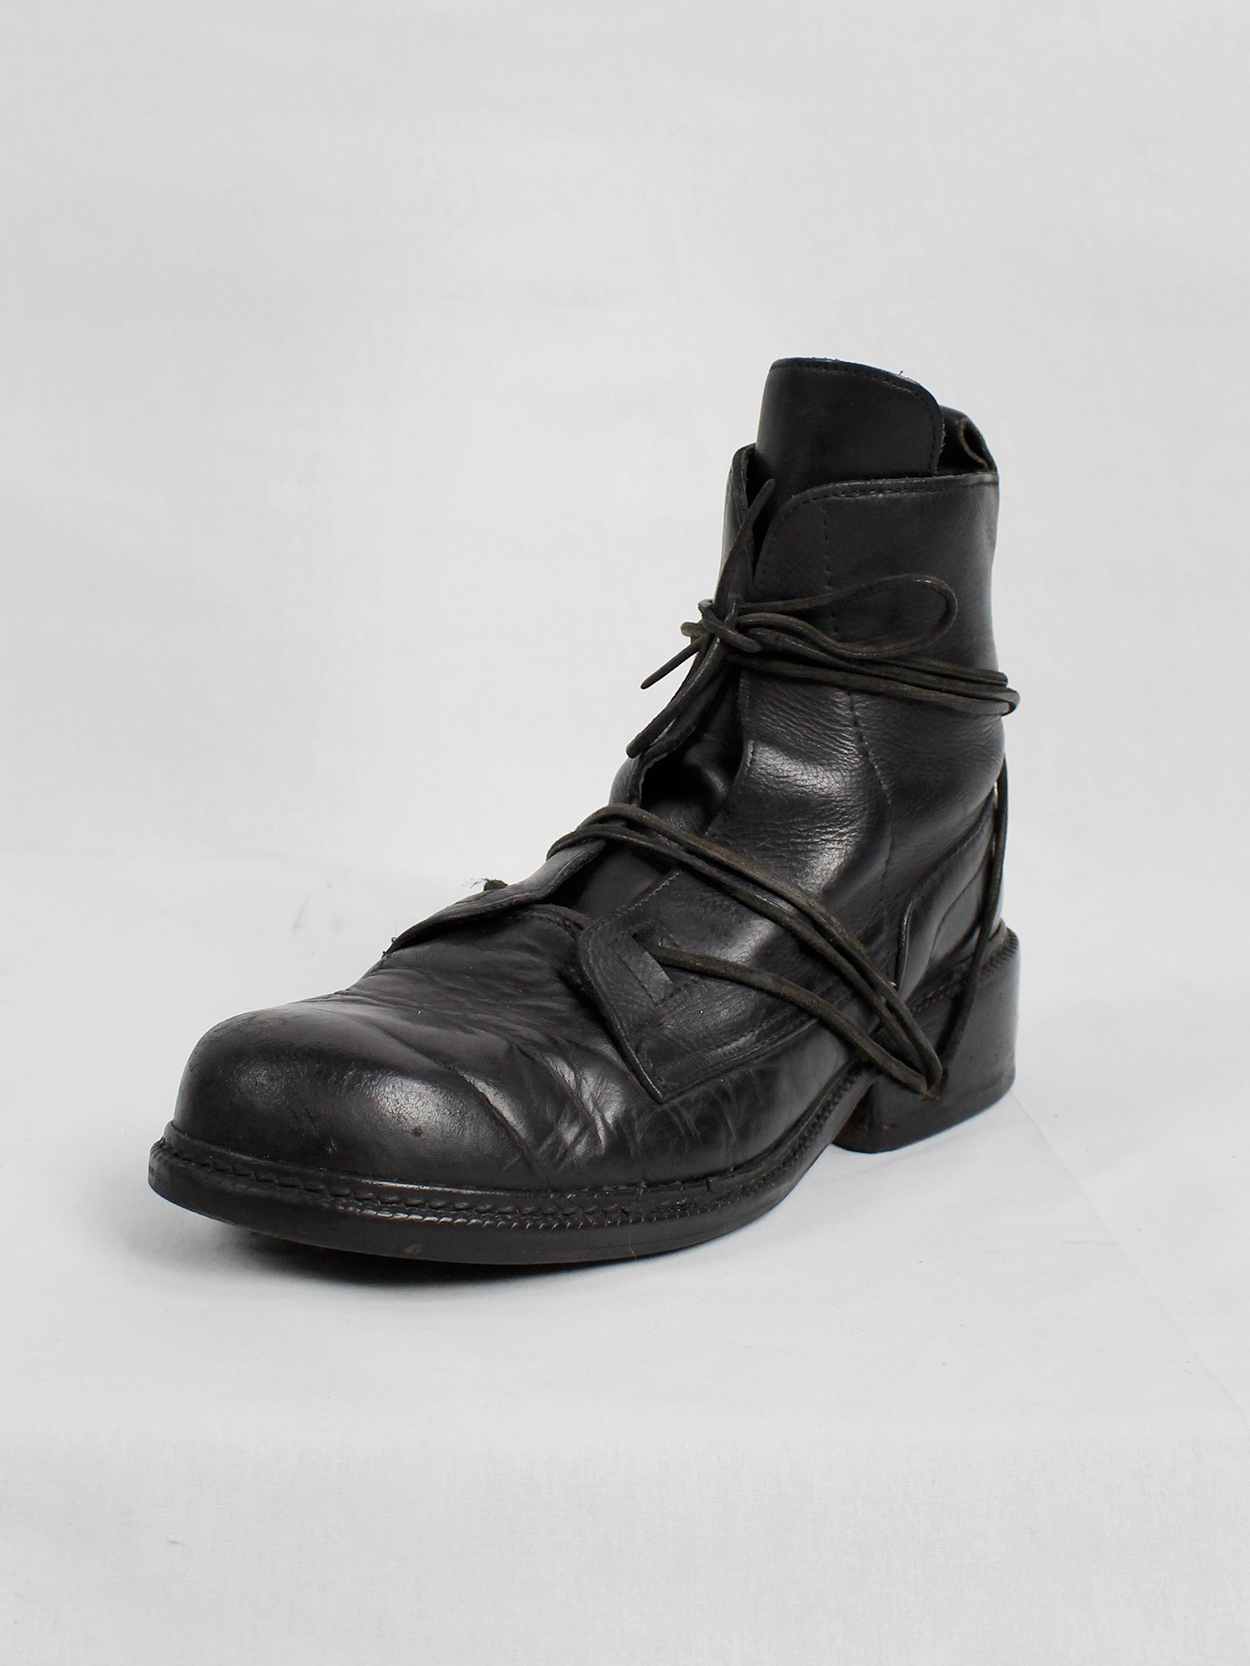 Dirk Bikkembergs black tall boots with laces through the soles 1990s 90s (8)